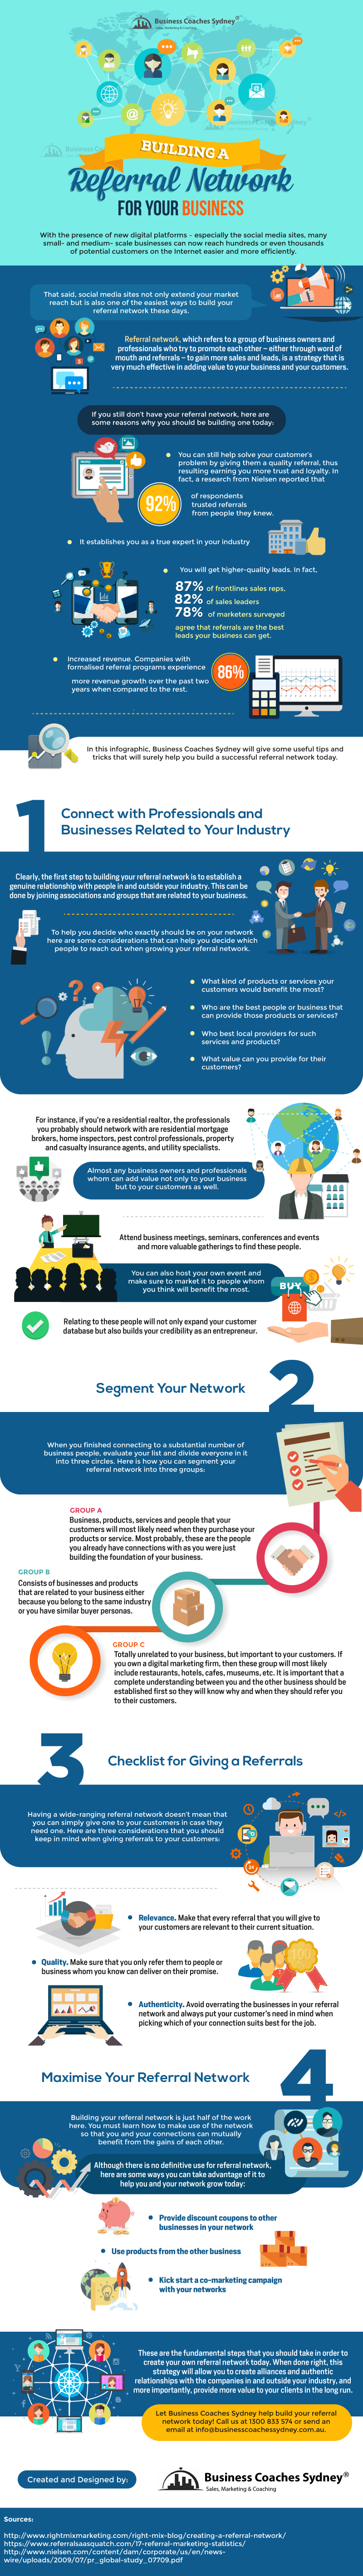 Tips, Tricks And Strategy To A Successful Referral Network 